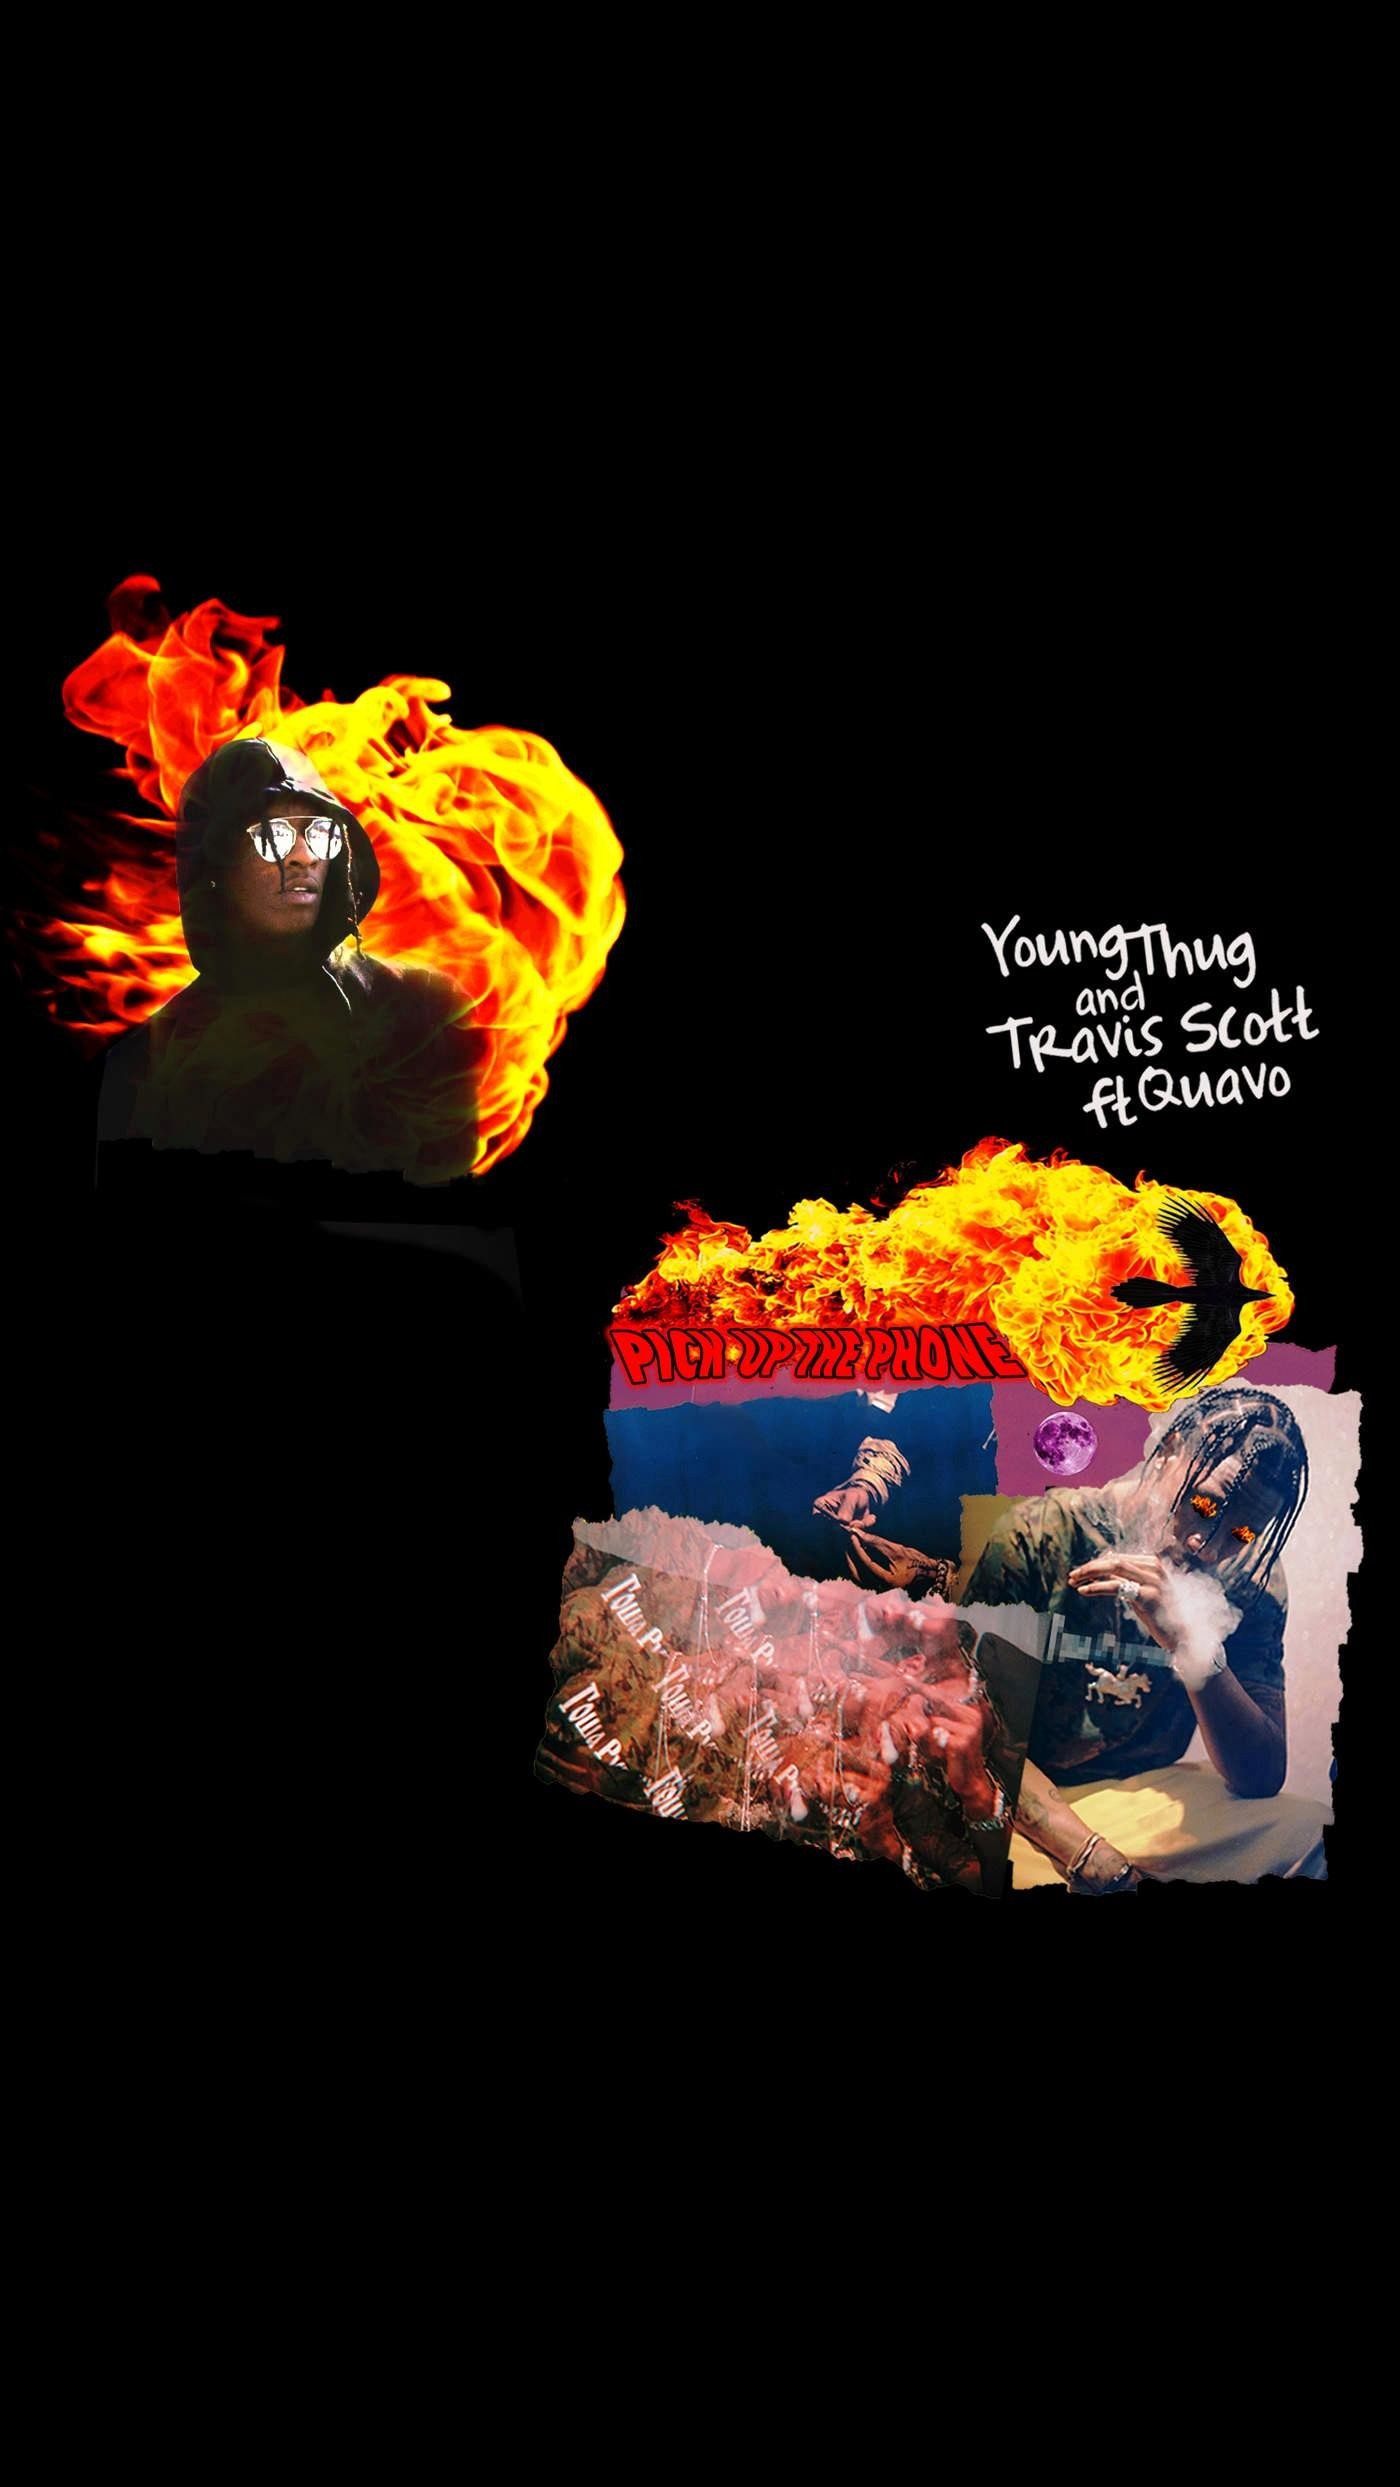 [mobile Wallpaper] Young Thug & Travis Scott - Young Thug Travis Scott Pick Up The Phone - HD Wallpaper 